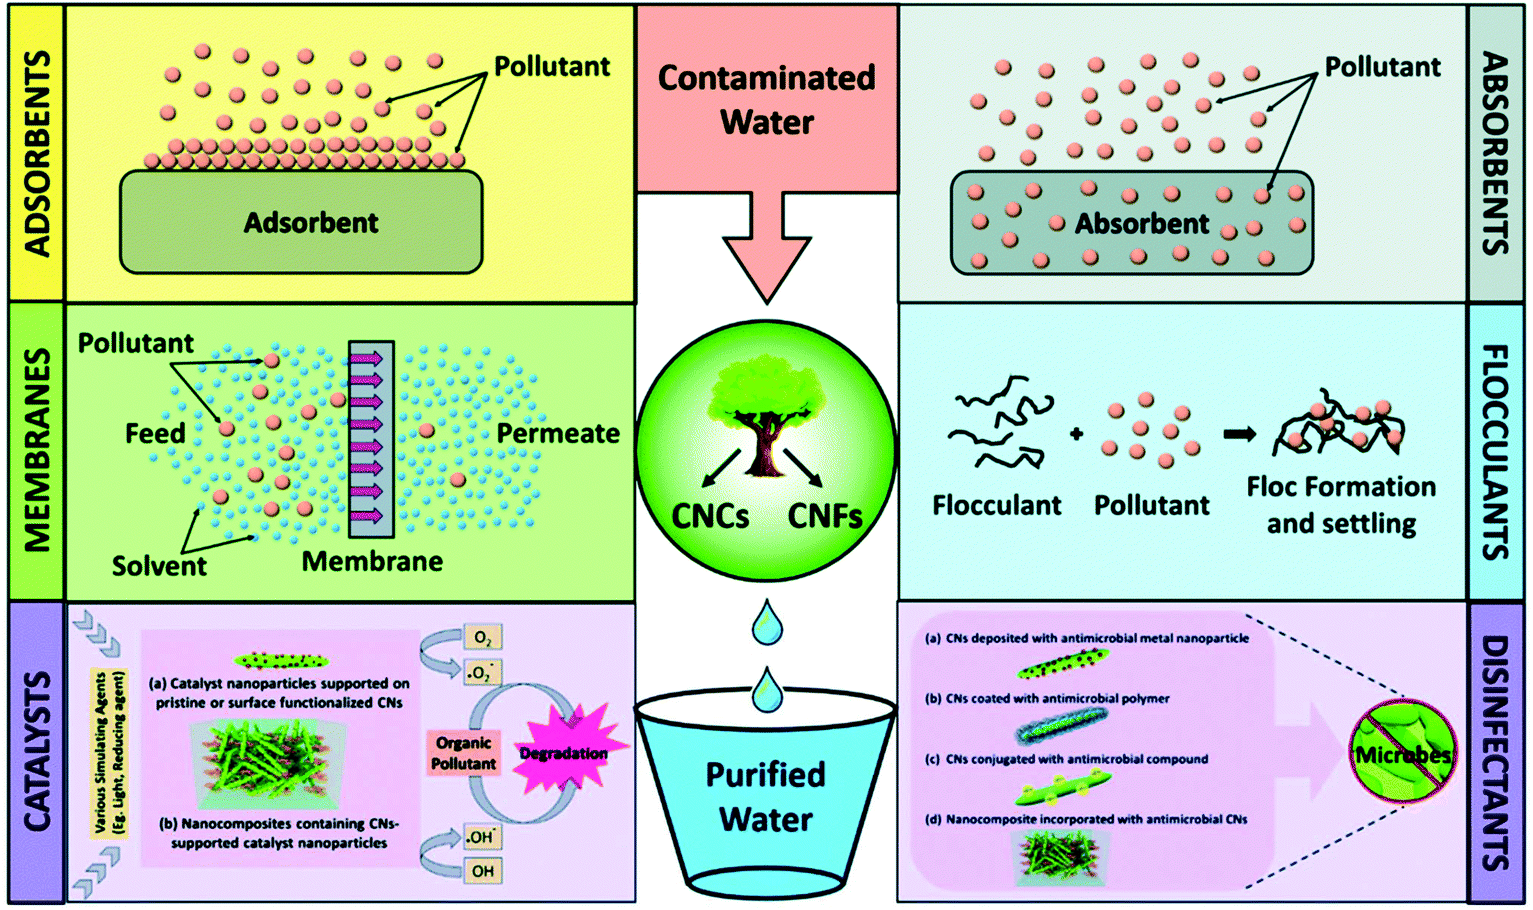 Plant Celluloses Hemicelluloses Lignins And Volatile Oils For The Synthesis Of Nanoparticles And Nanostructured Materials Nanoscale Rsc Publishing Doi 10 1039 D0nrc